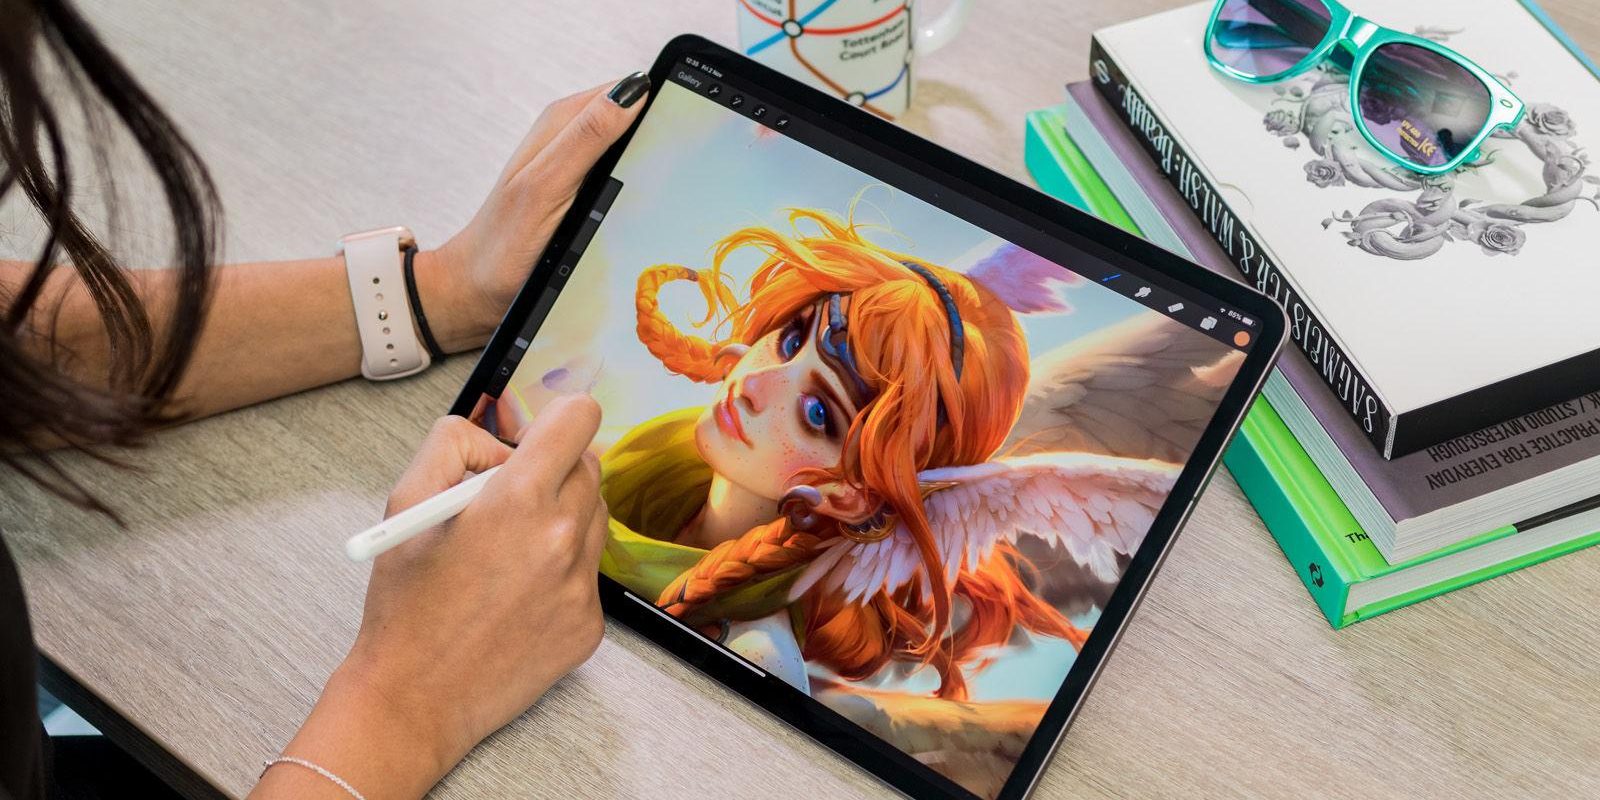 Ranking the best drawing apps for 2022